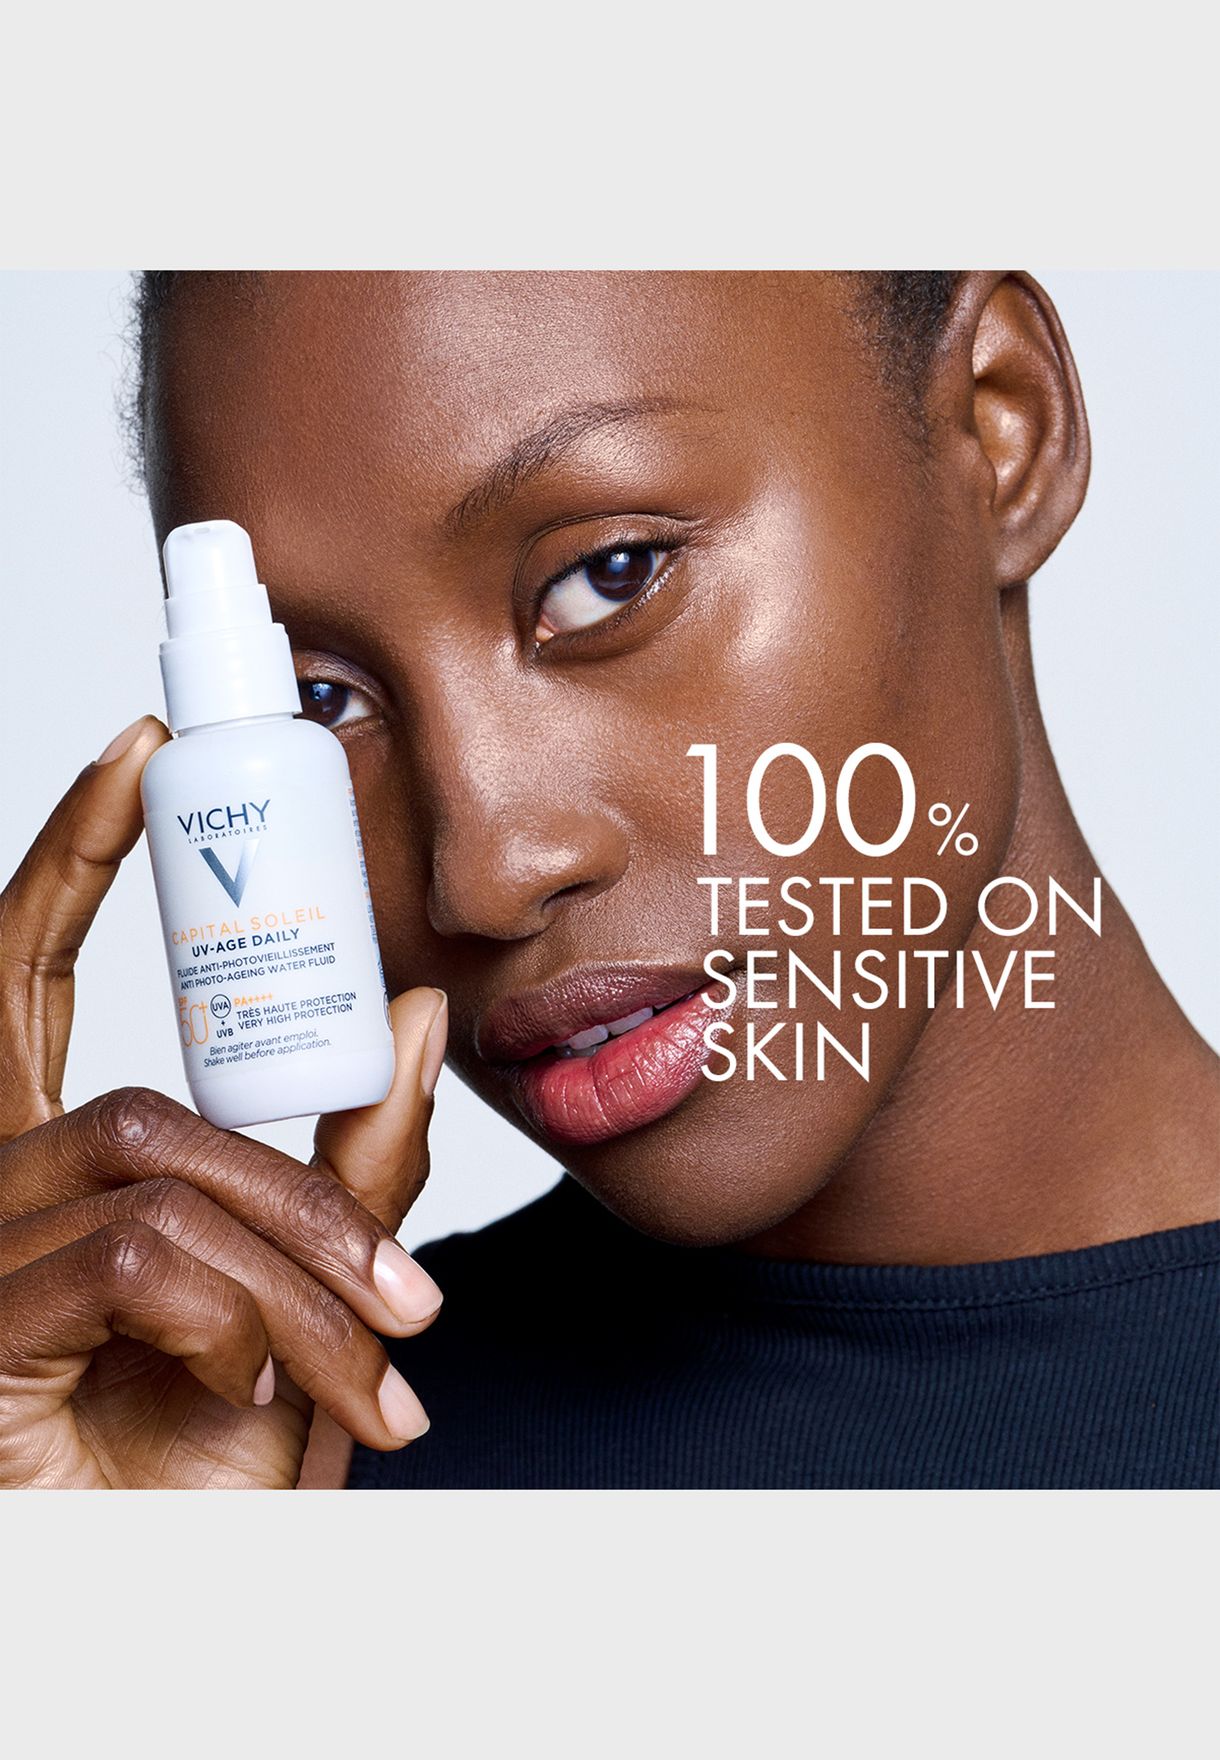 Vichy Capital Soleil UV - Age Anti Ageing Sunscreen SPF 50+ with Niacinamide 40ml